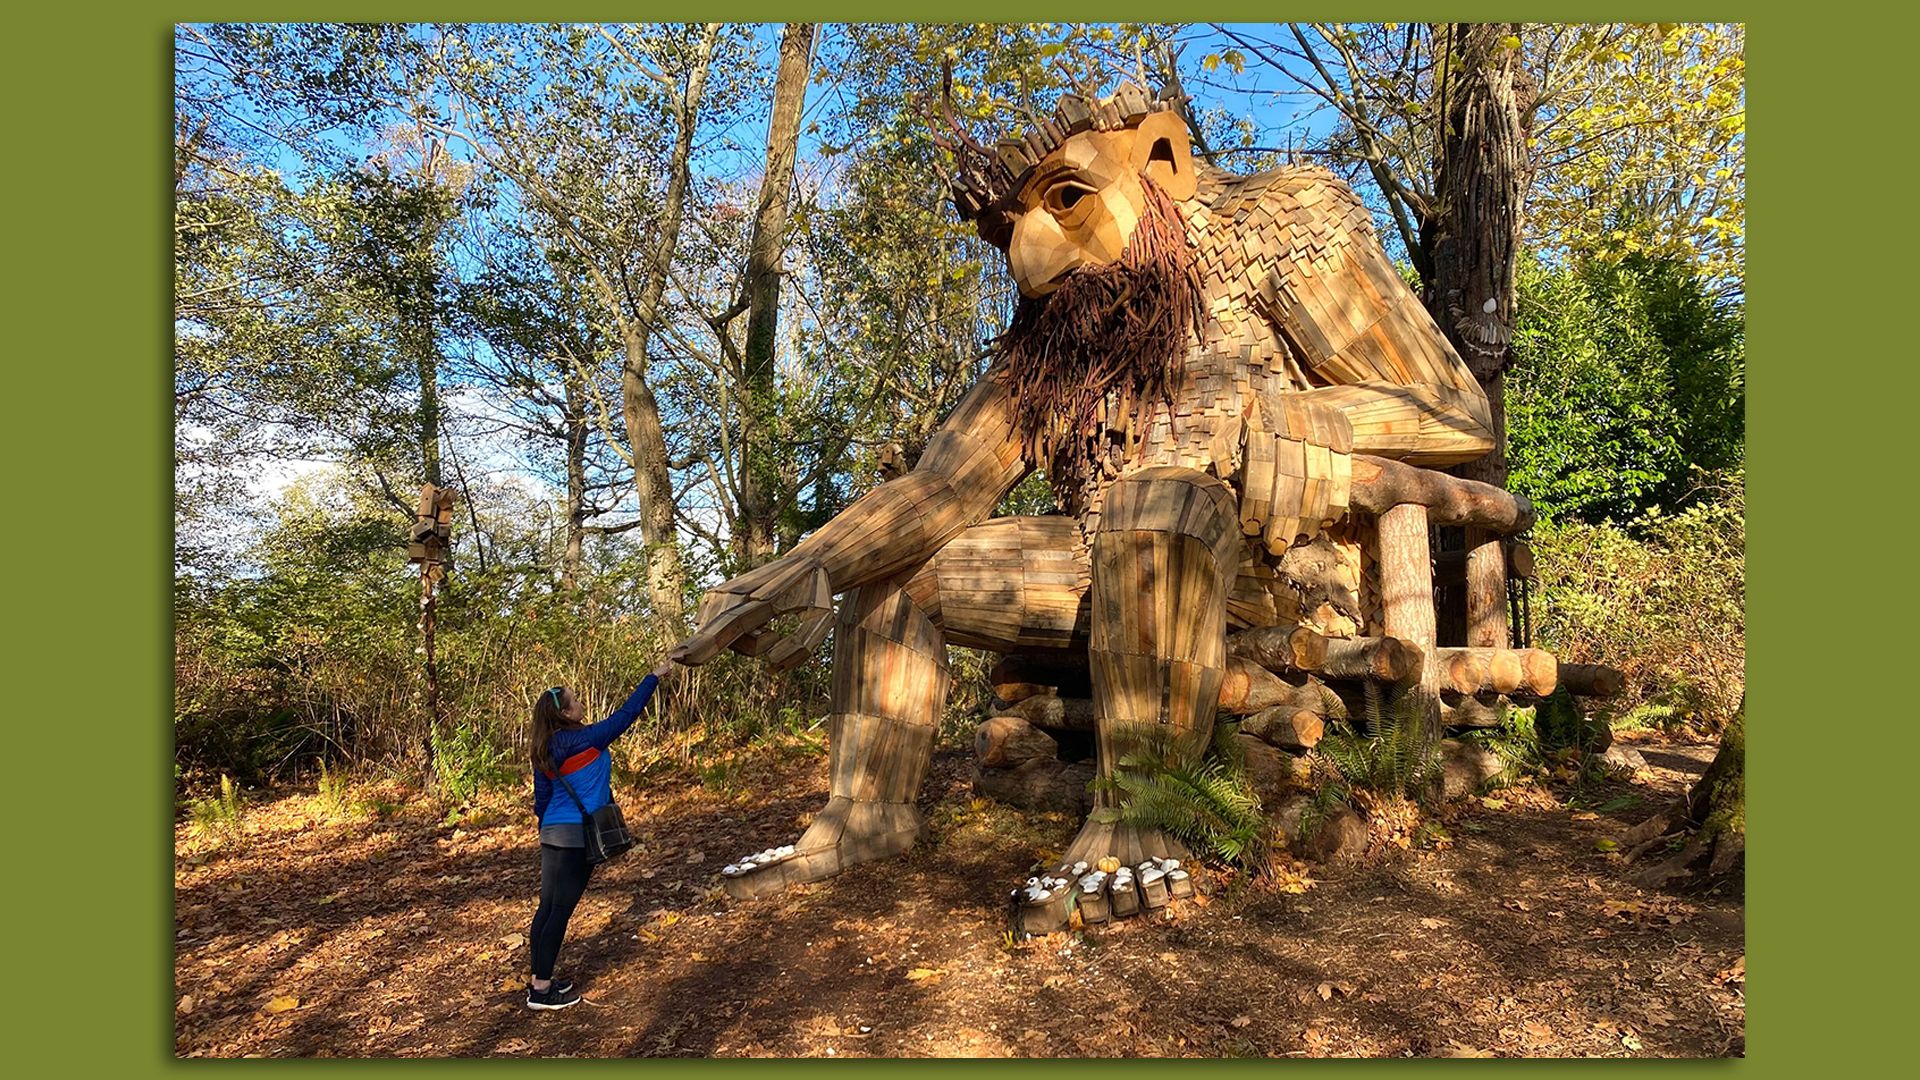 A towering wooden troll sits on a throne surrounded by trees as a woman reaches out to touch its hand.